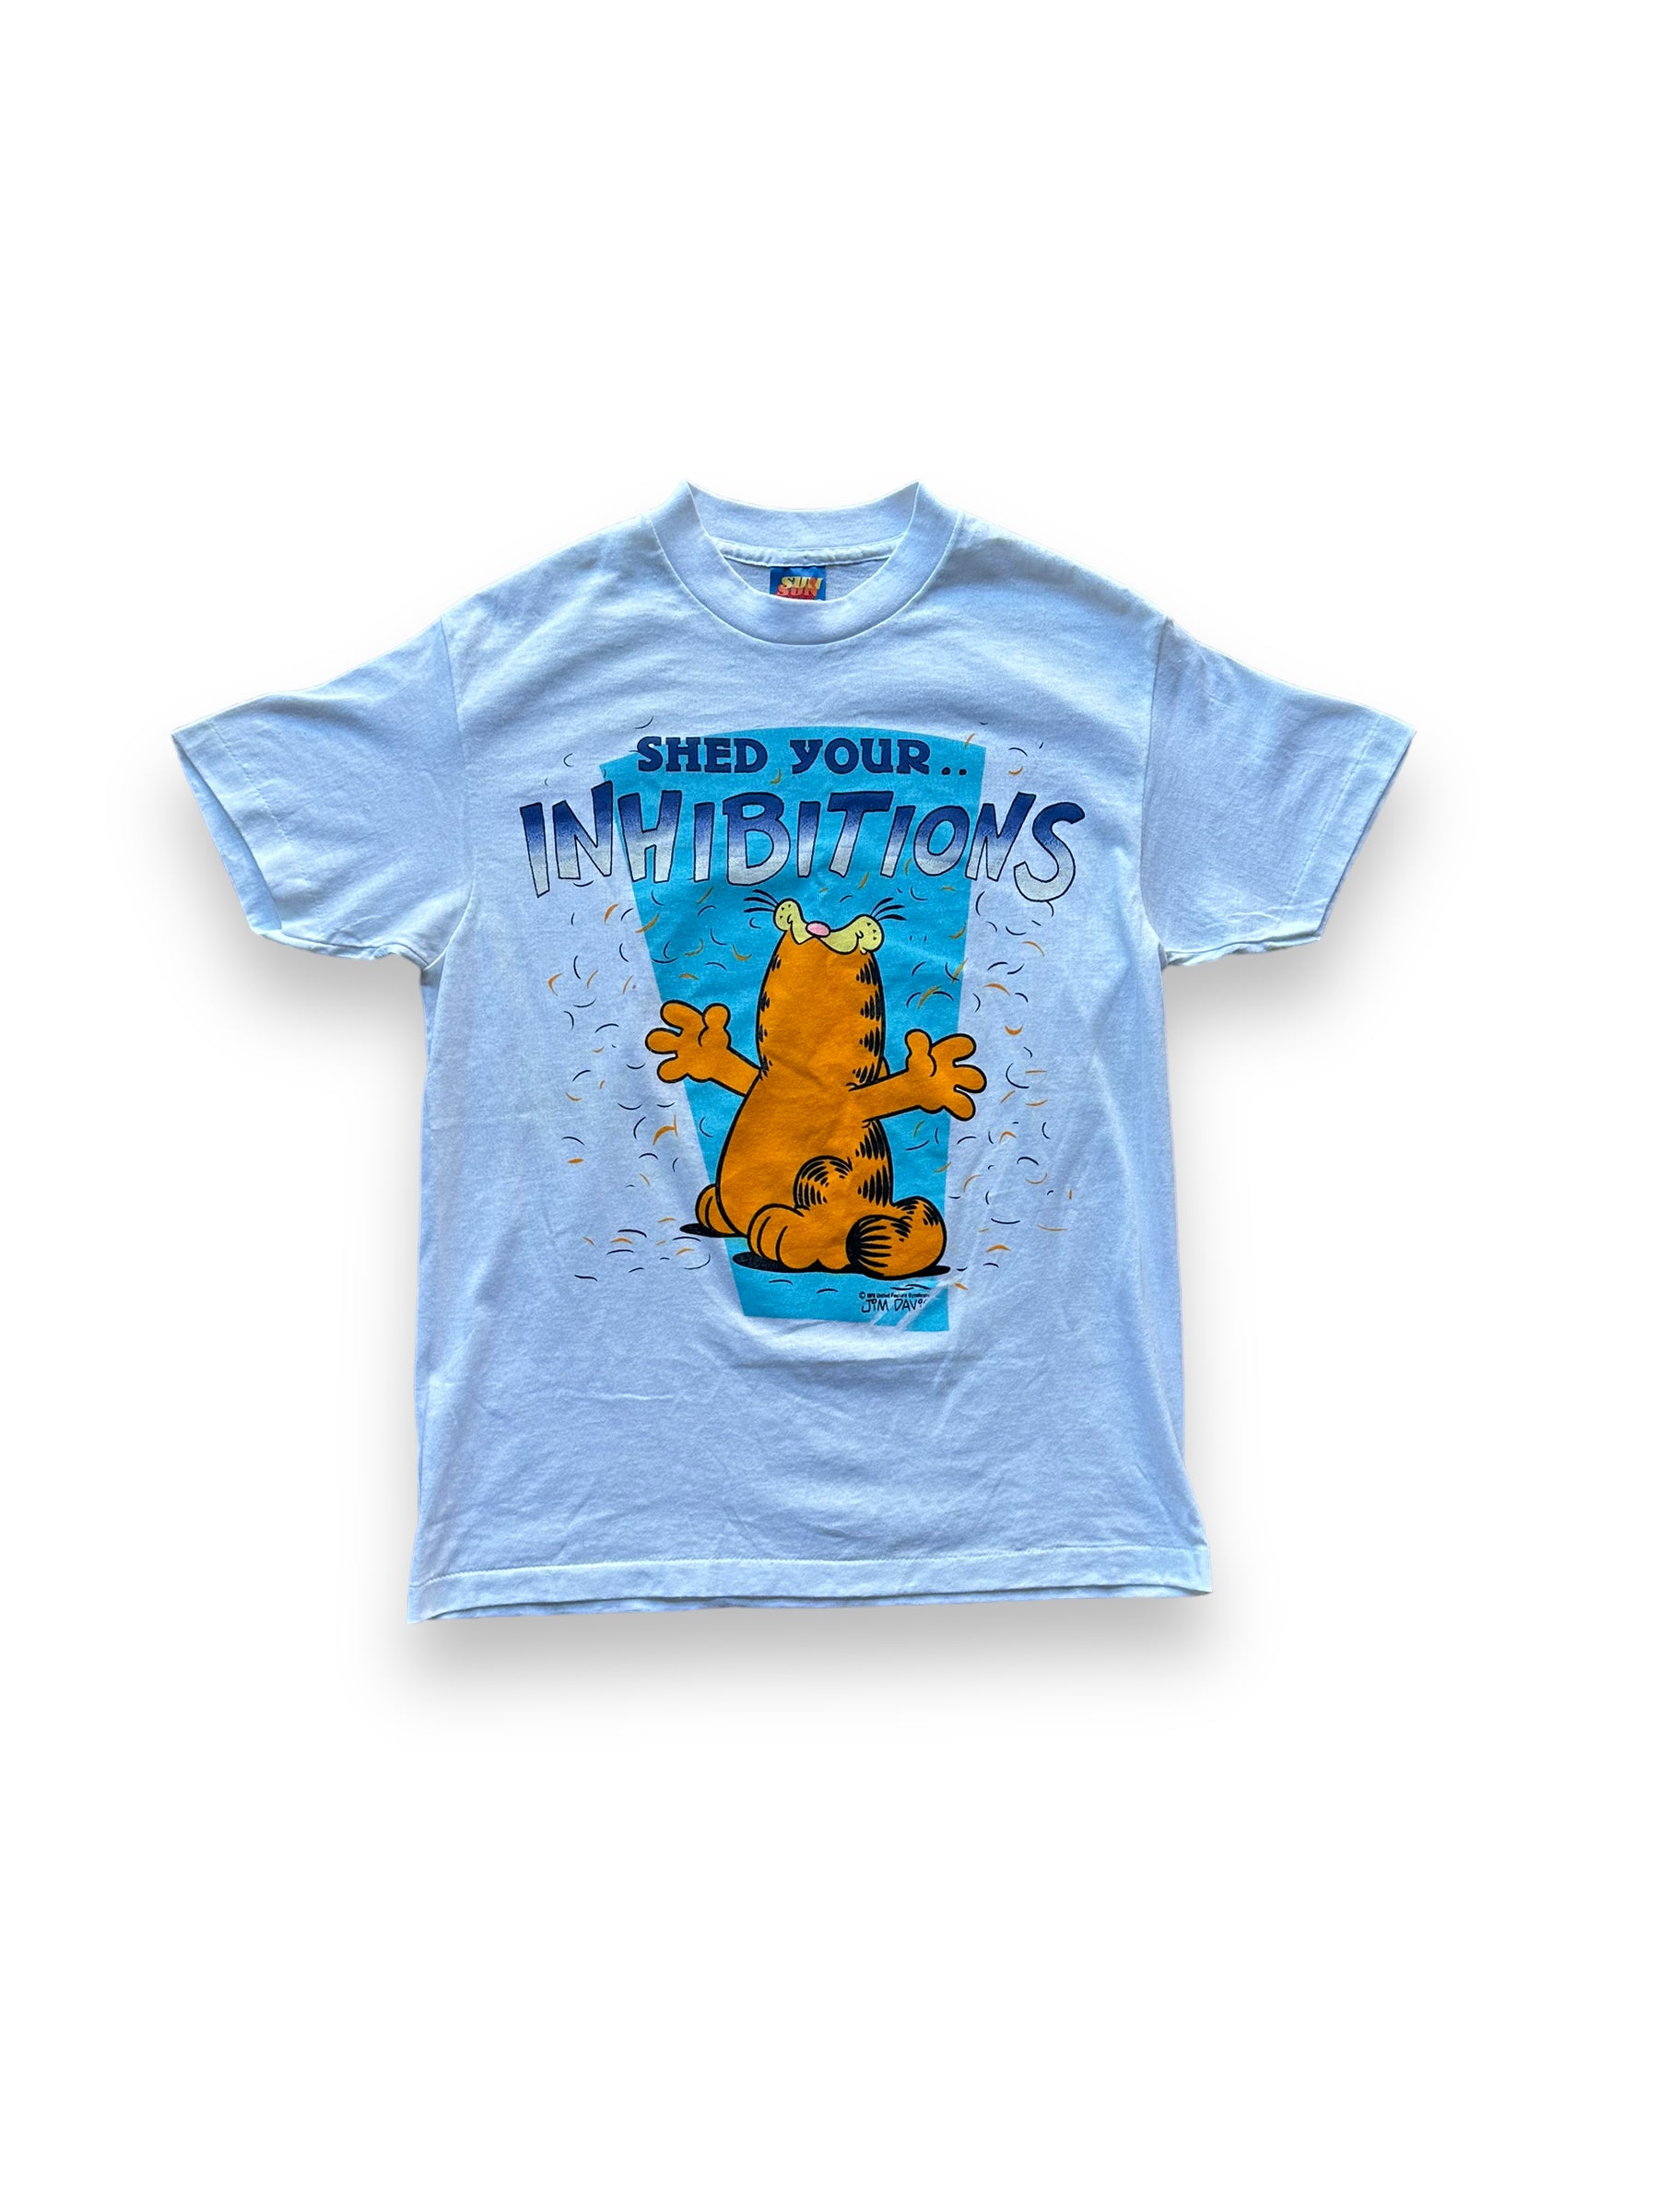 Front of Vintage Garfield "Shed Your Inhibitions" Tee SZ M |  Vintage Cat Tee Seattle | Barn Owl Vintage